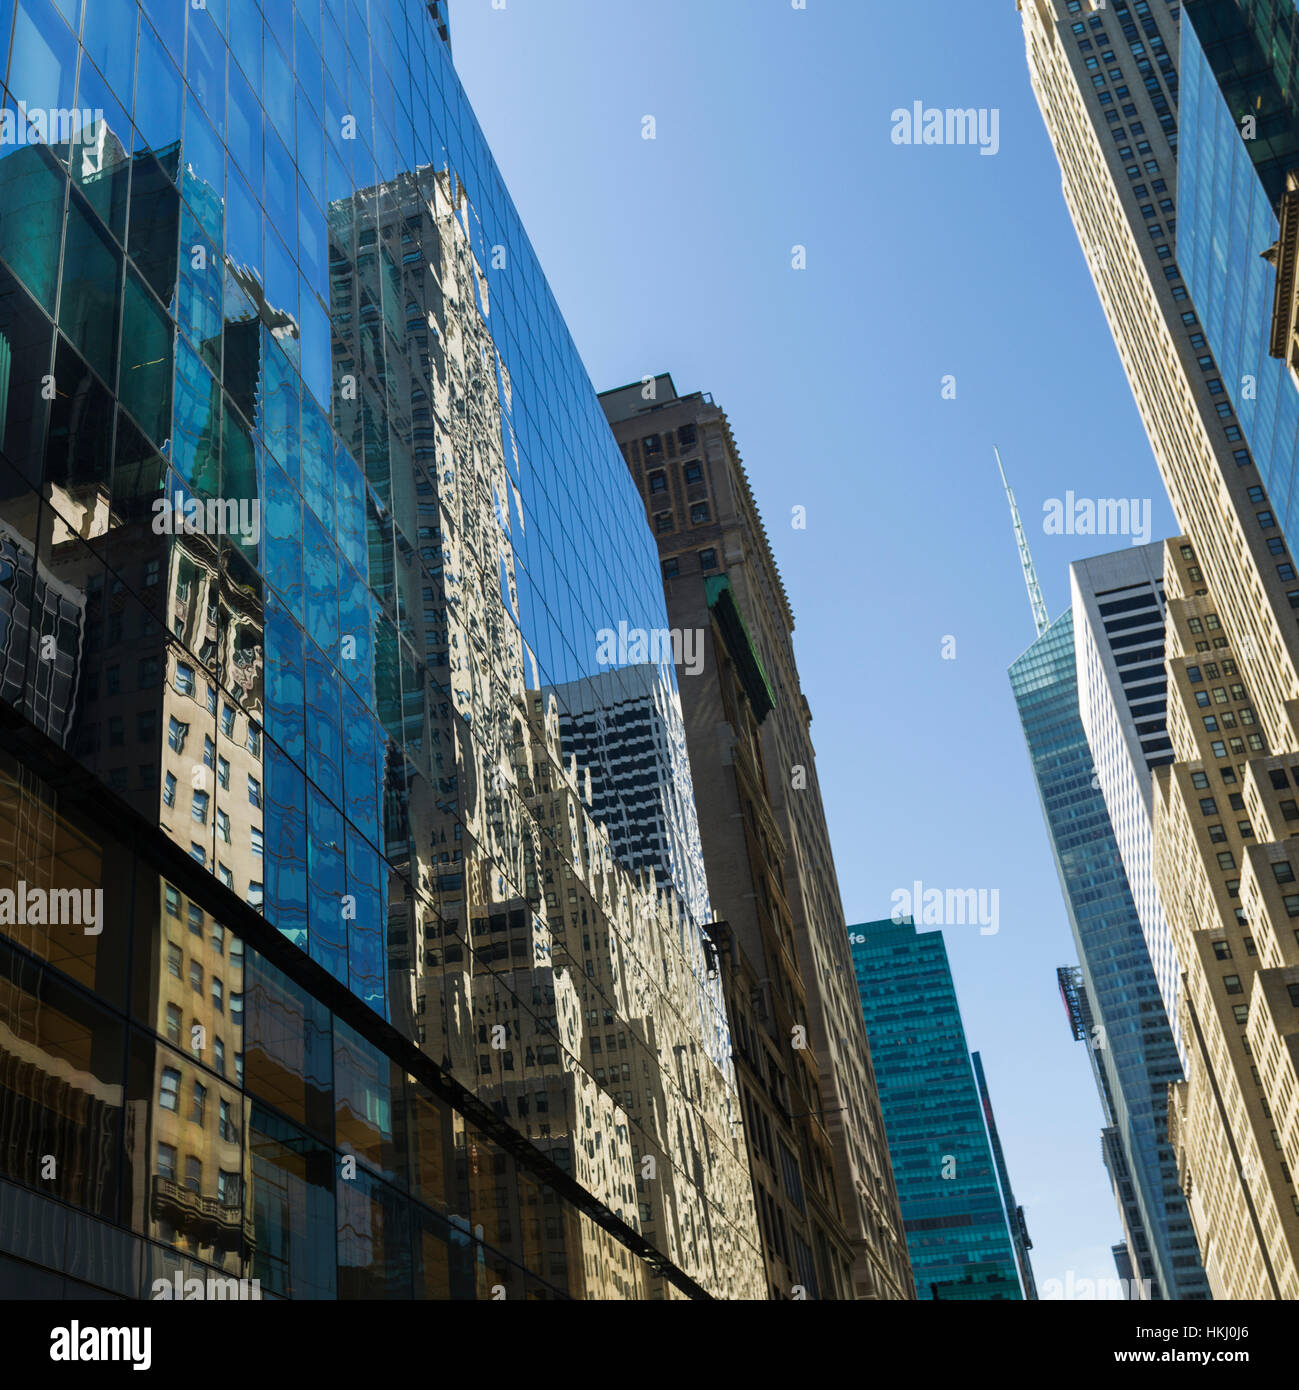 Glass facade of a skyscraper reflecting other skyscrapers; New York City, New York, United States of America Stock Photo